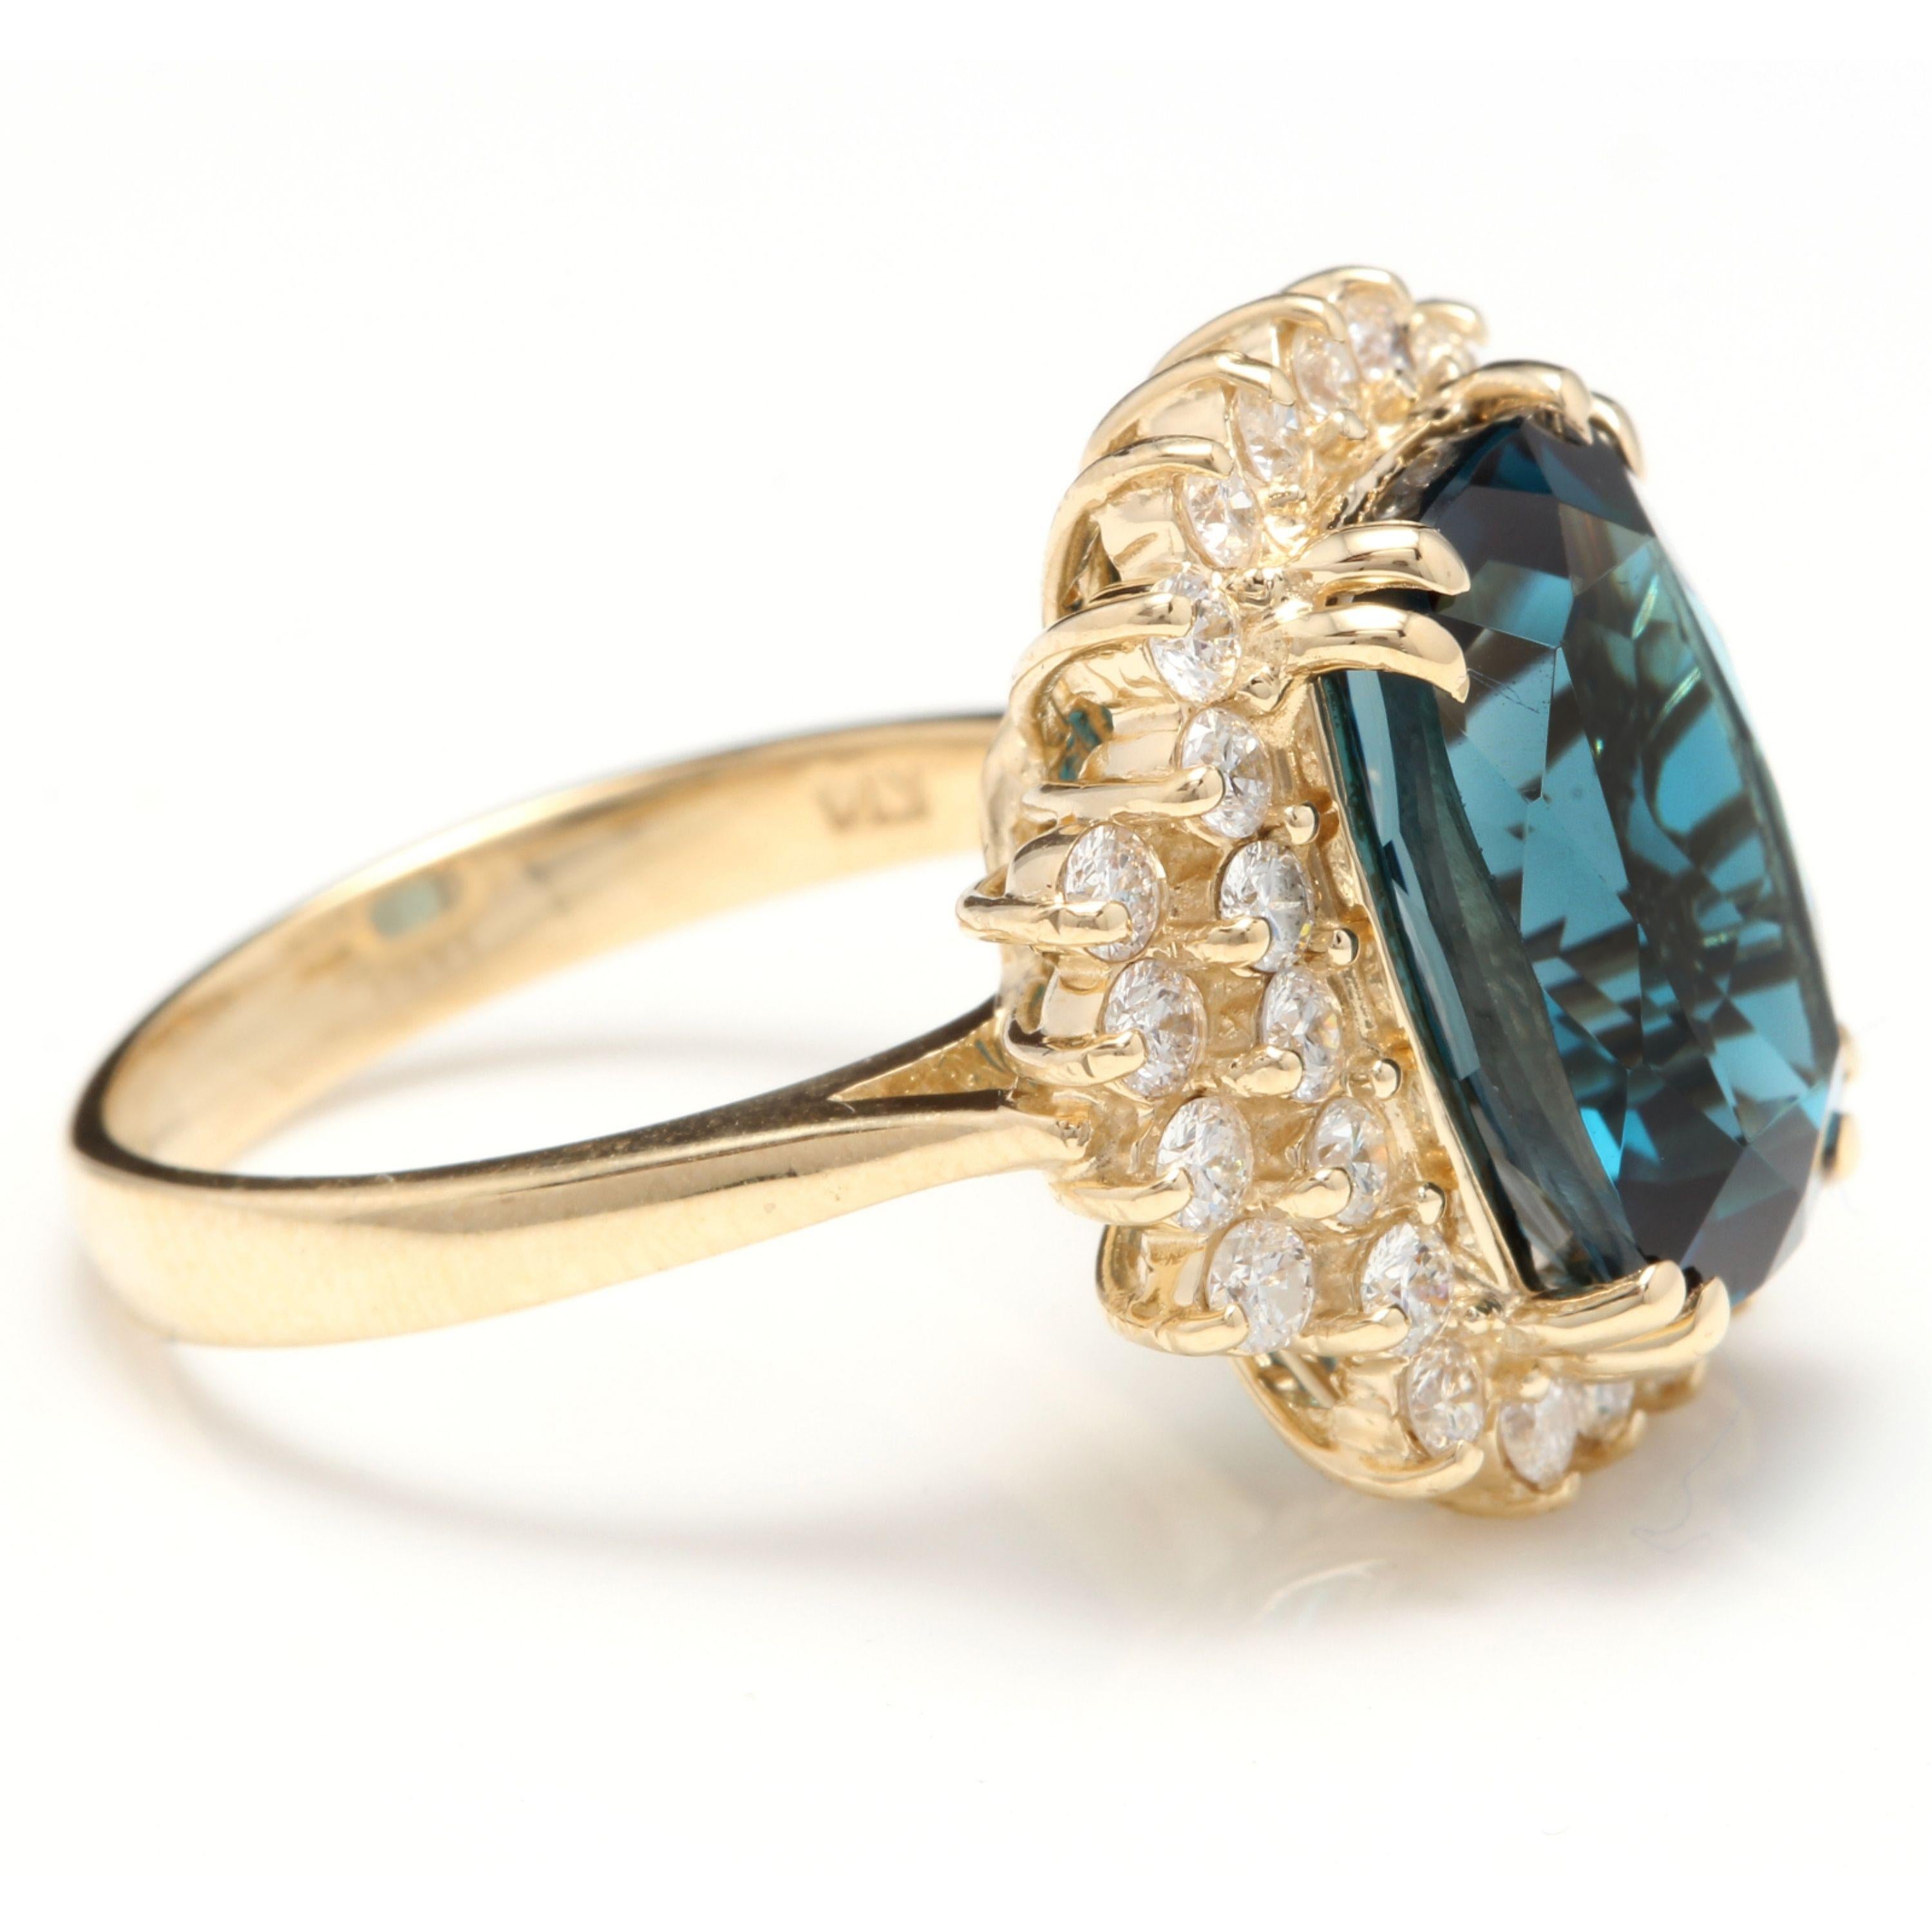 Mixed Cut 10.15 Ct Natural Impressive London Blue Topaz and Diamond 14k Yellow Gold Ring